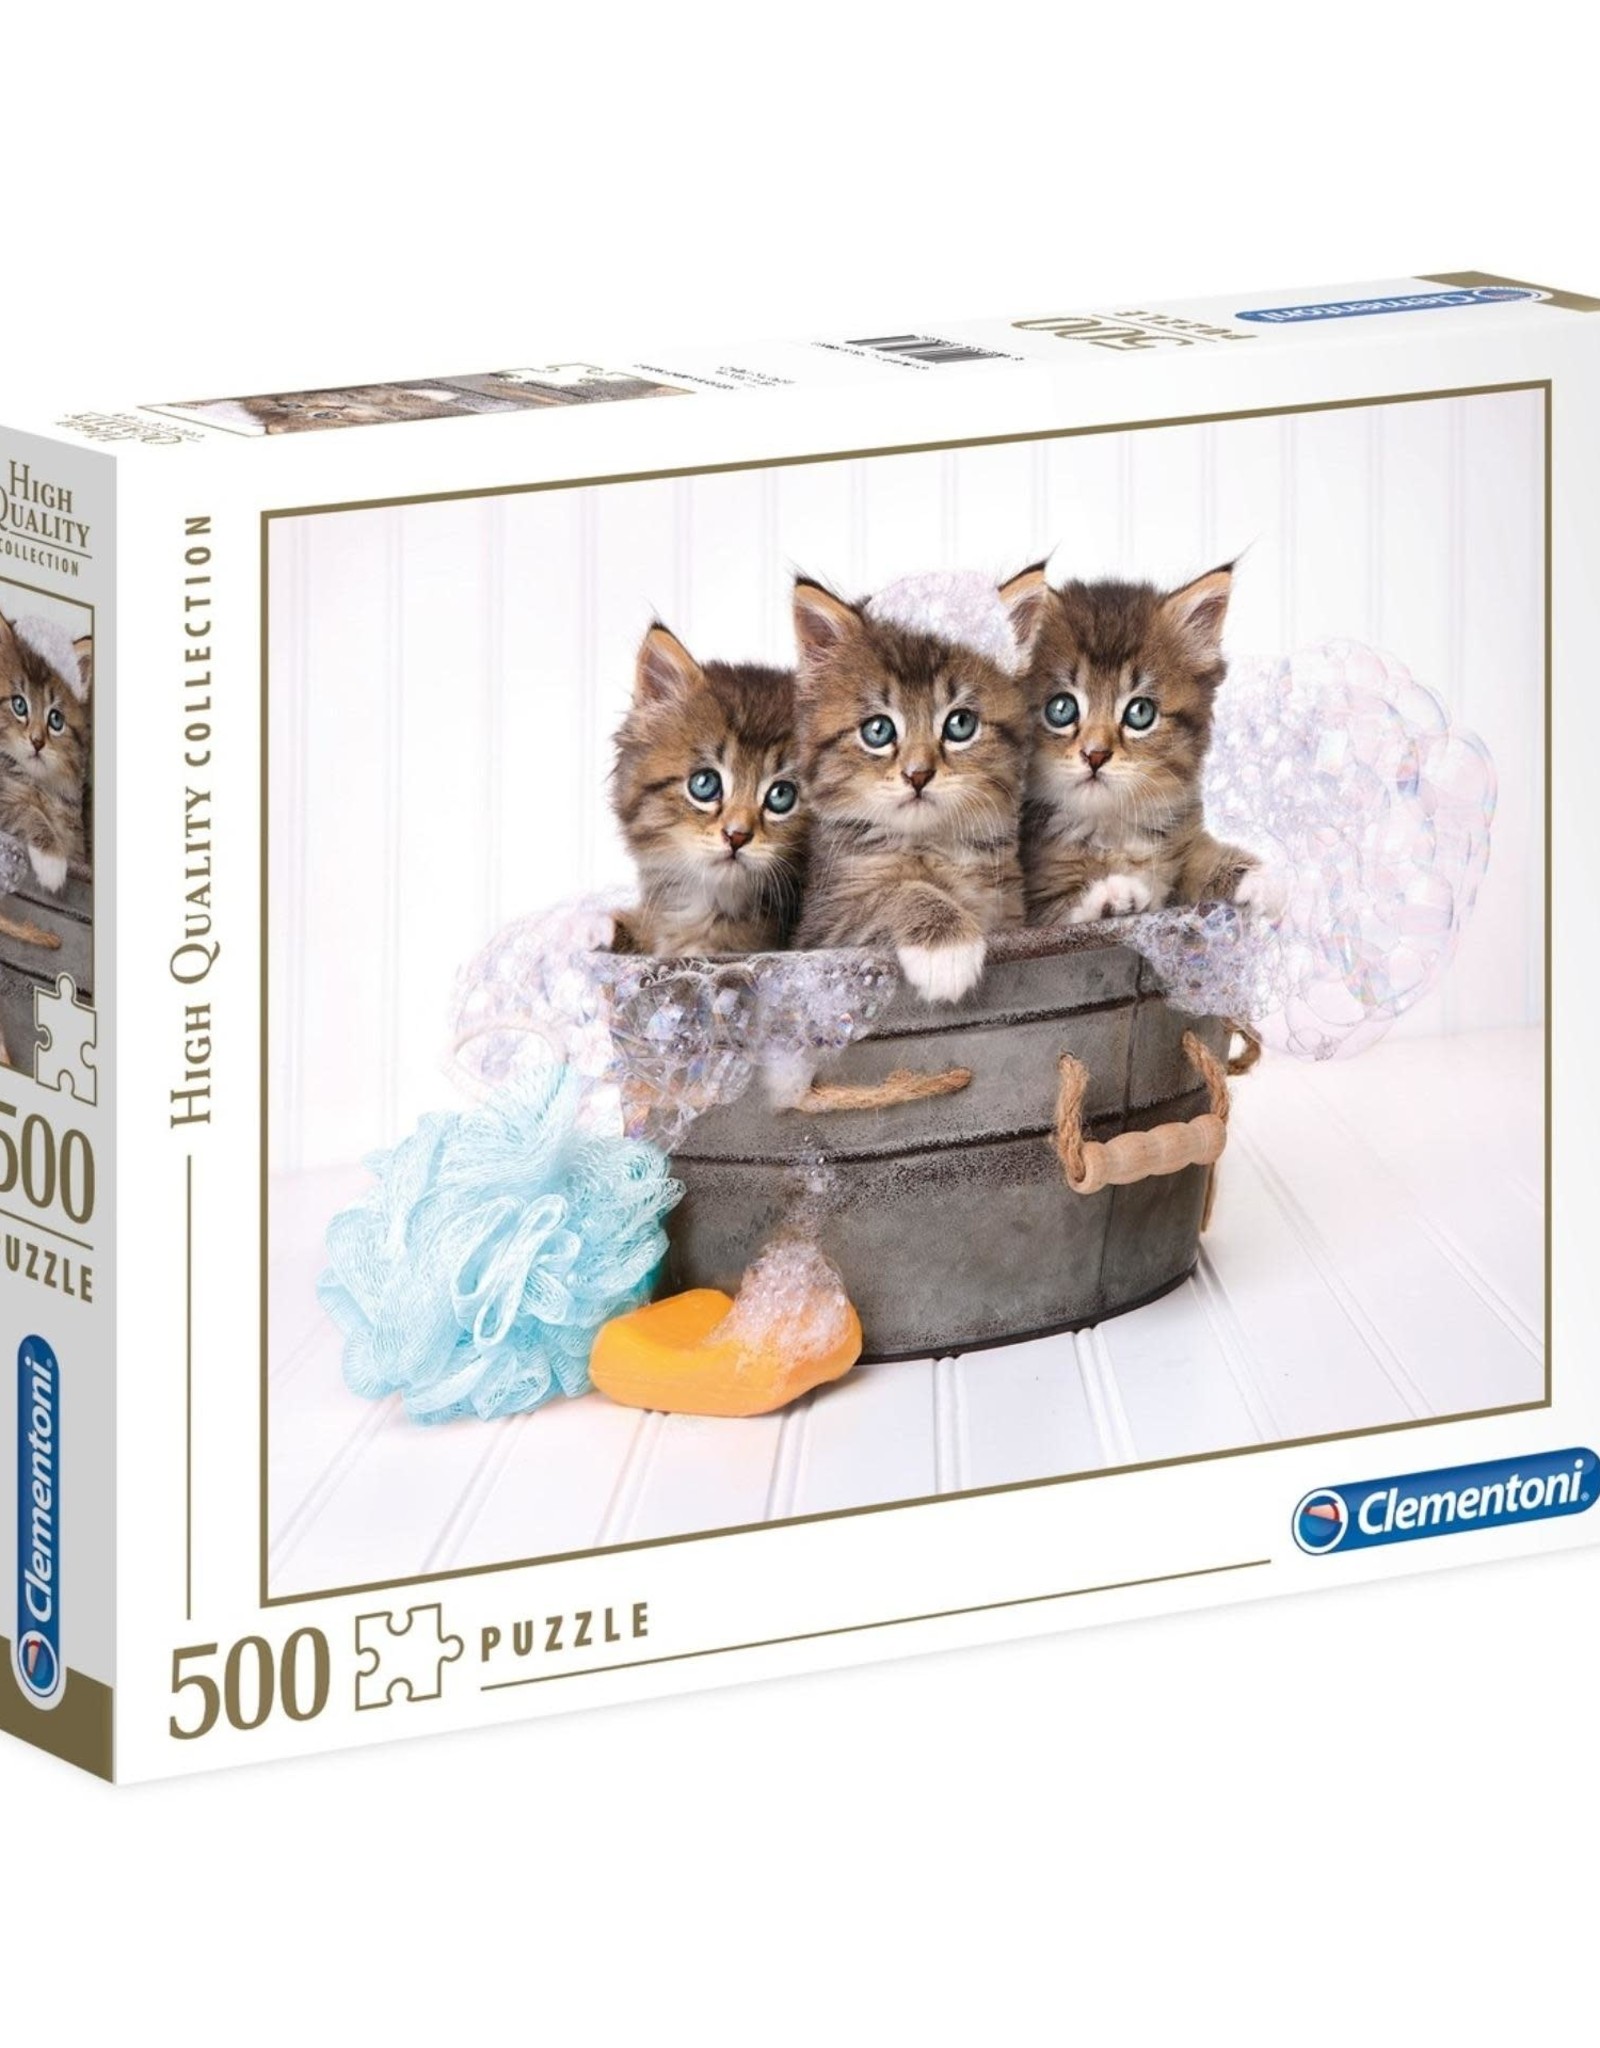 Clementoni 500PC HQC -KITTENS AND SOAP